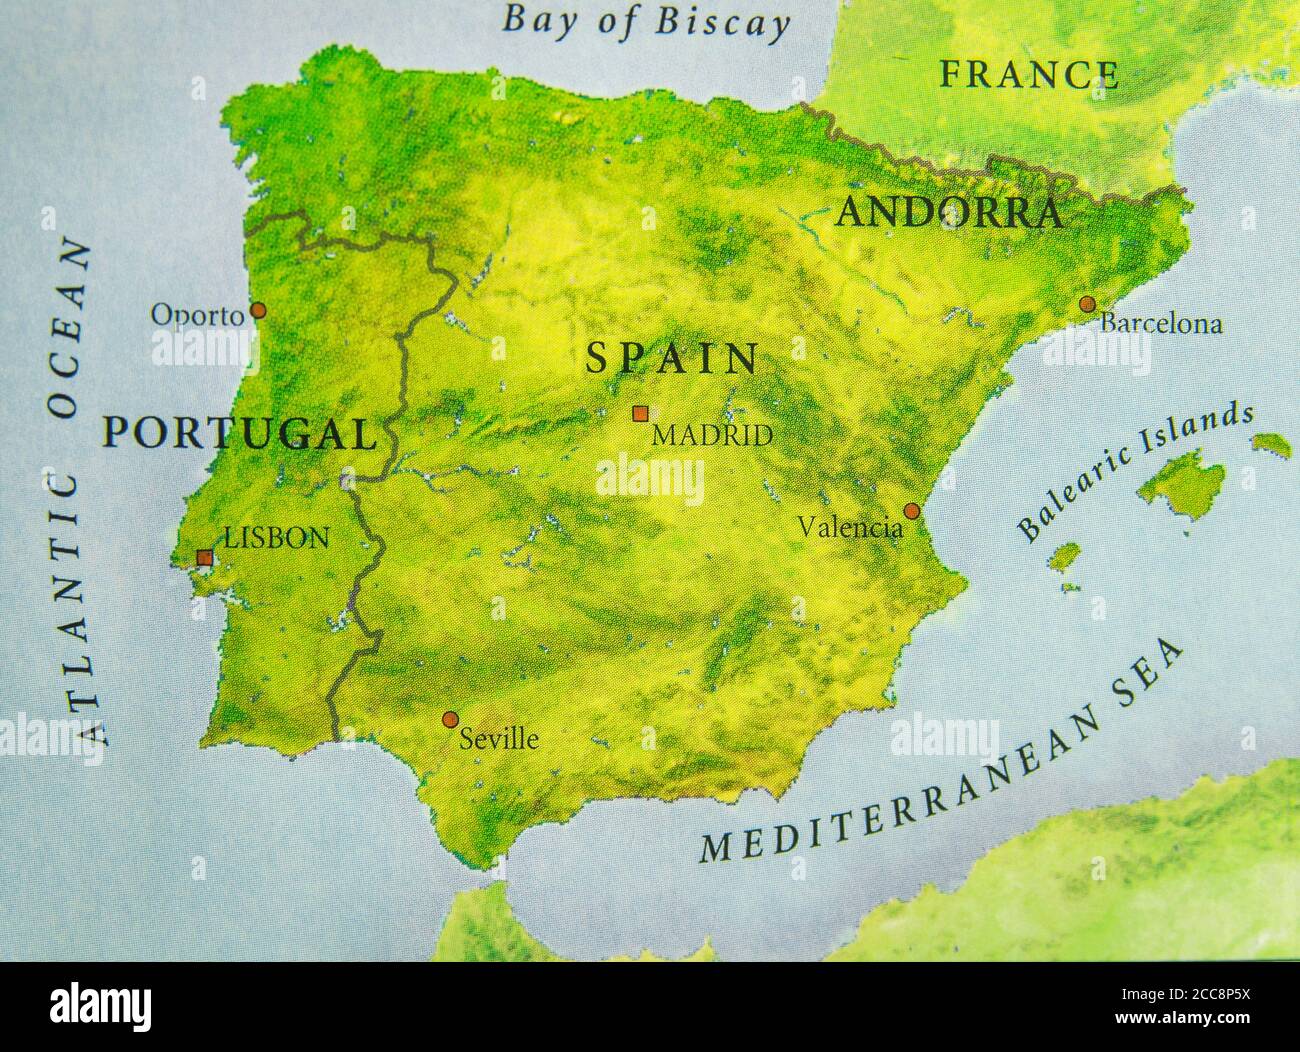 Geographic map of European country Portugal and Spain with important cities  Stock Photo - Alamy